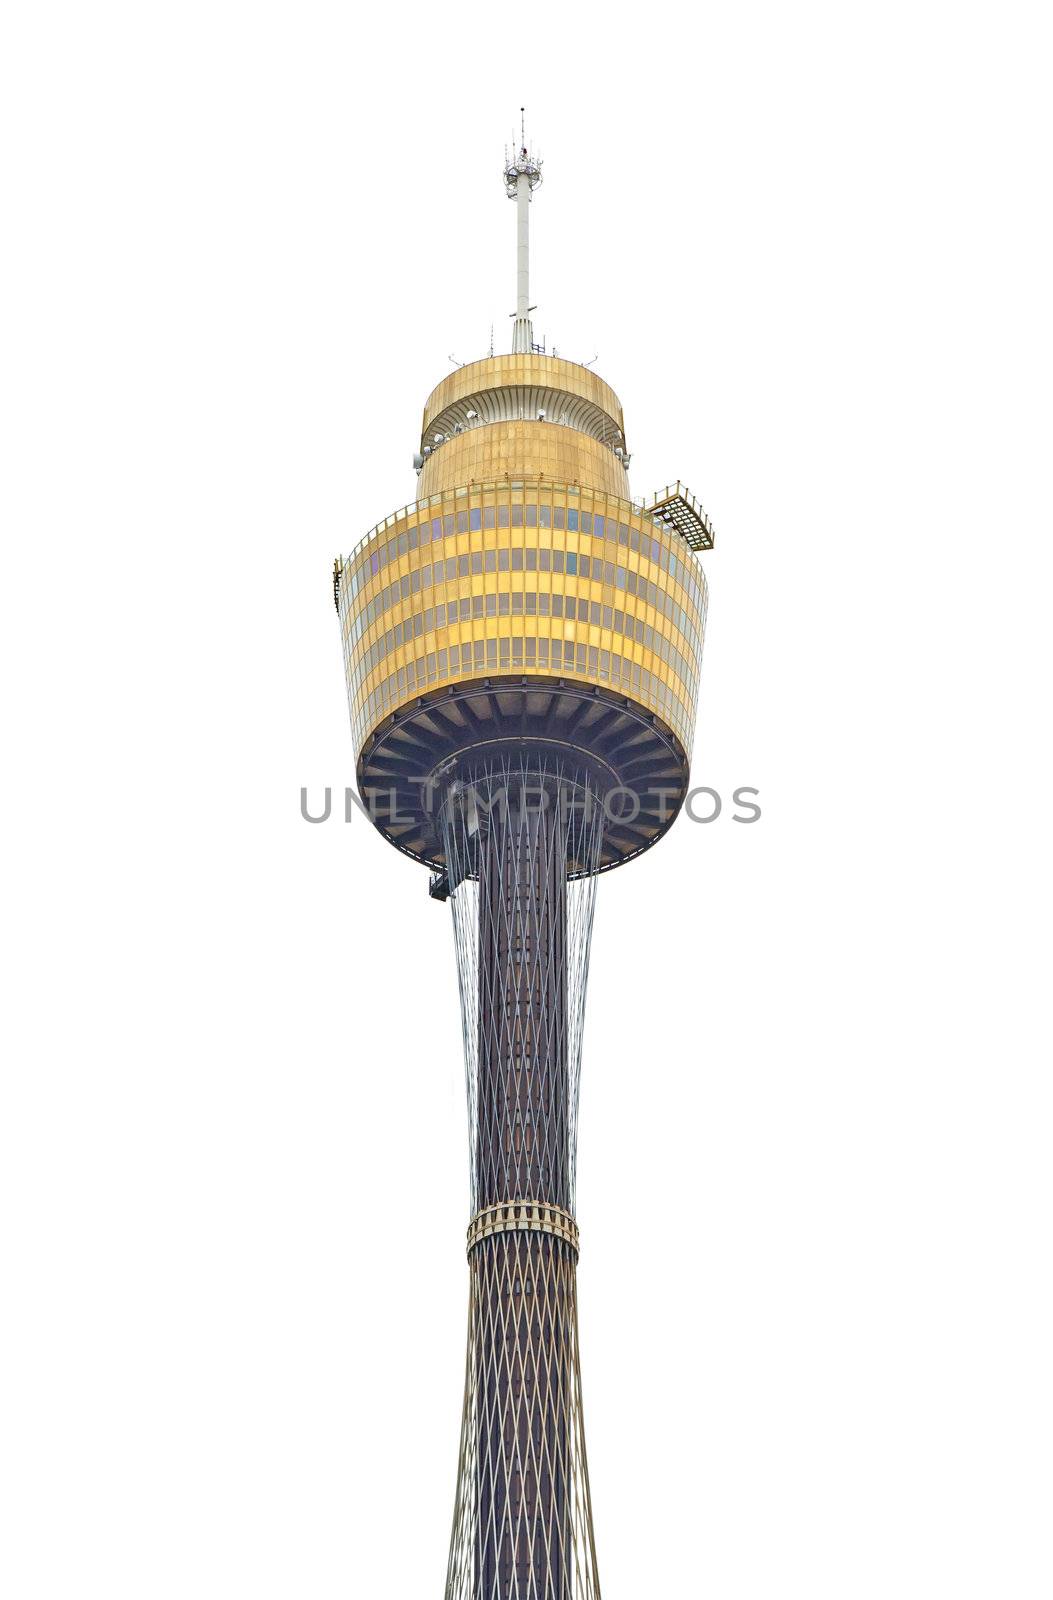 An image of the tv tower in Sydney Australia